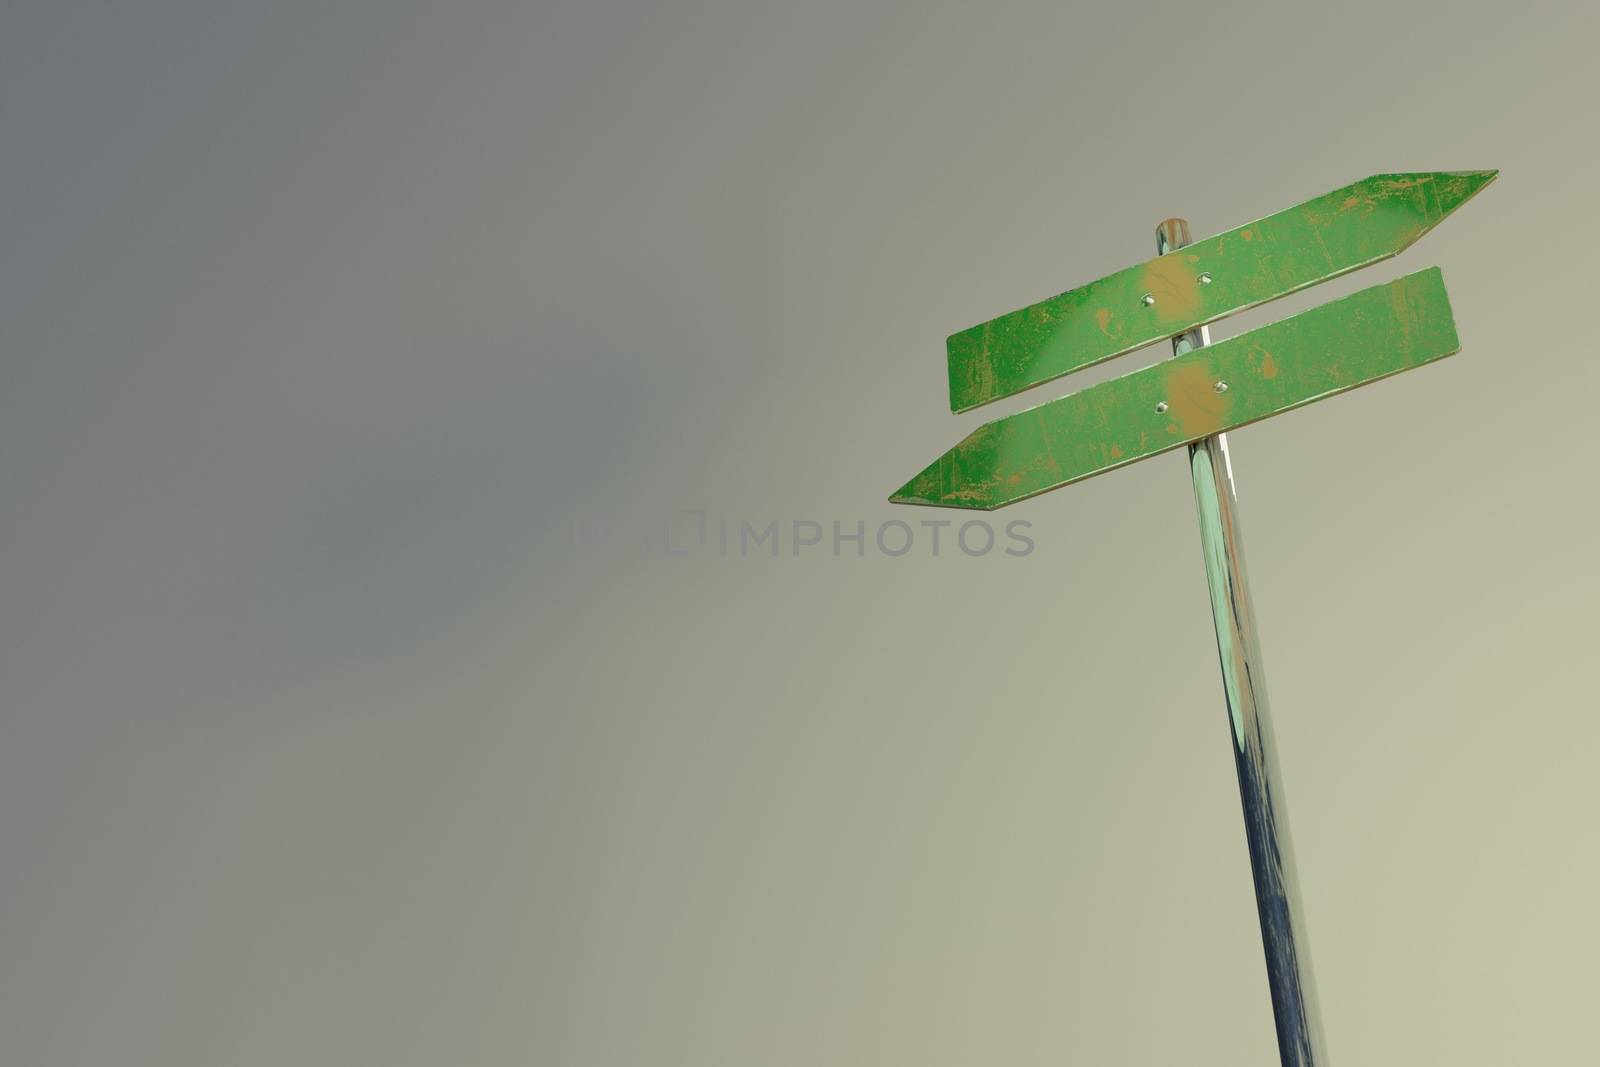 3d rendering , Blank directional road signs , green metal arrows on the signpost. Warm toned colors. Old style image , space for text